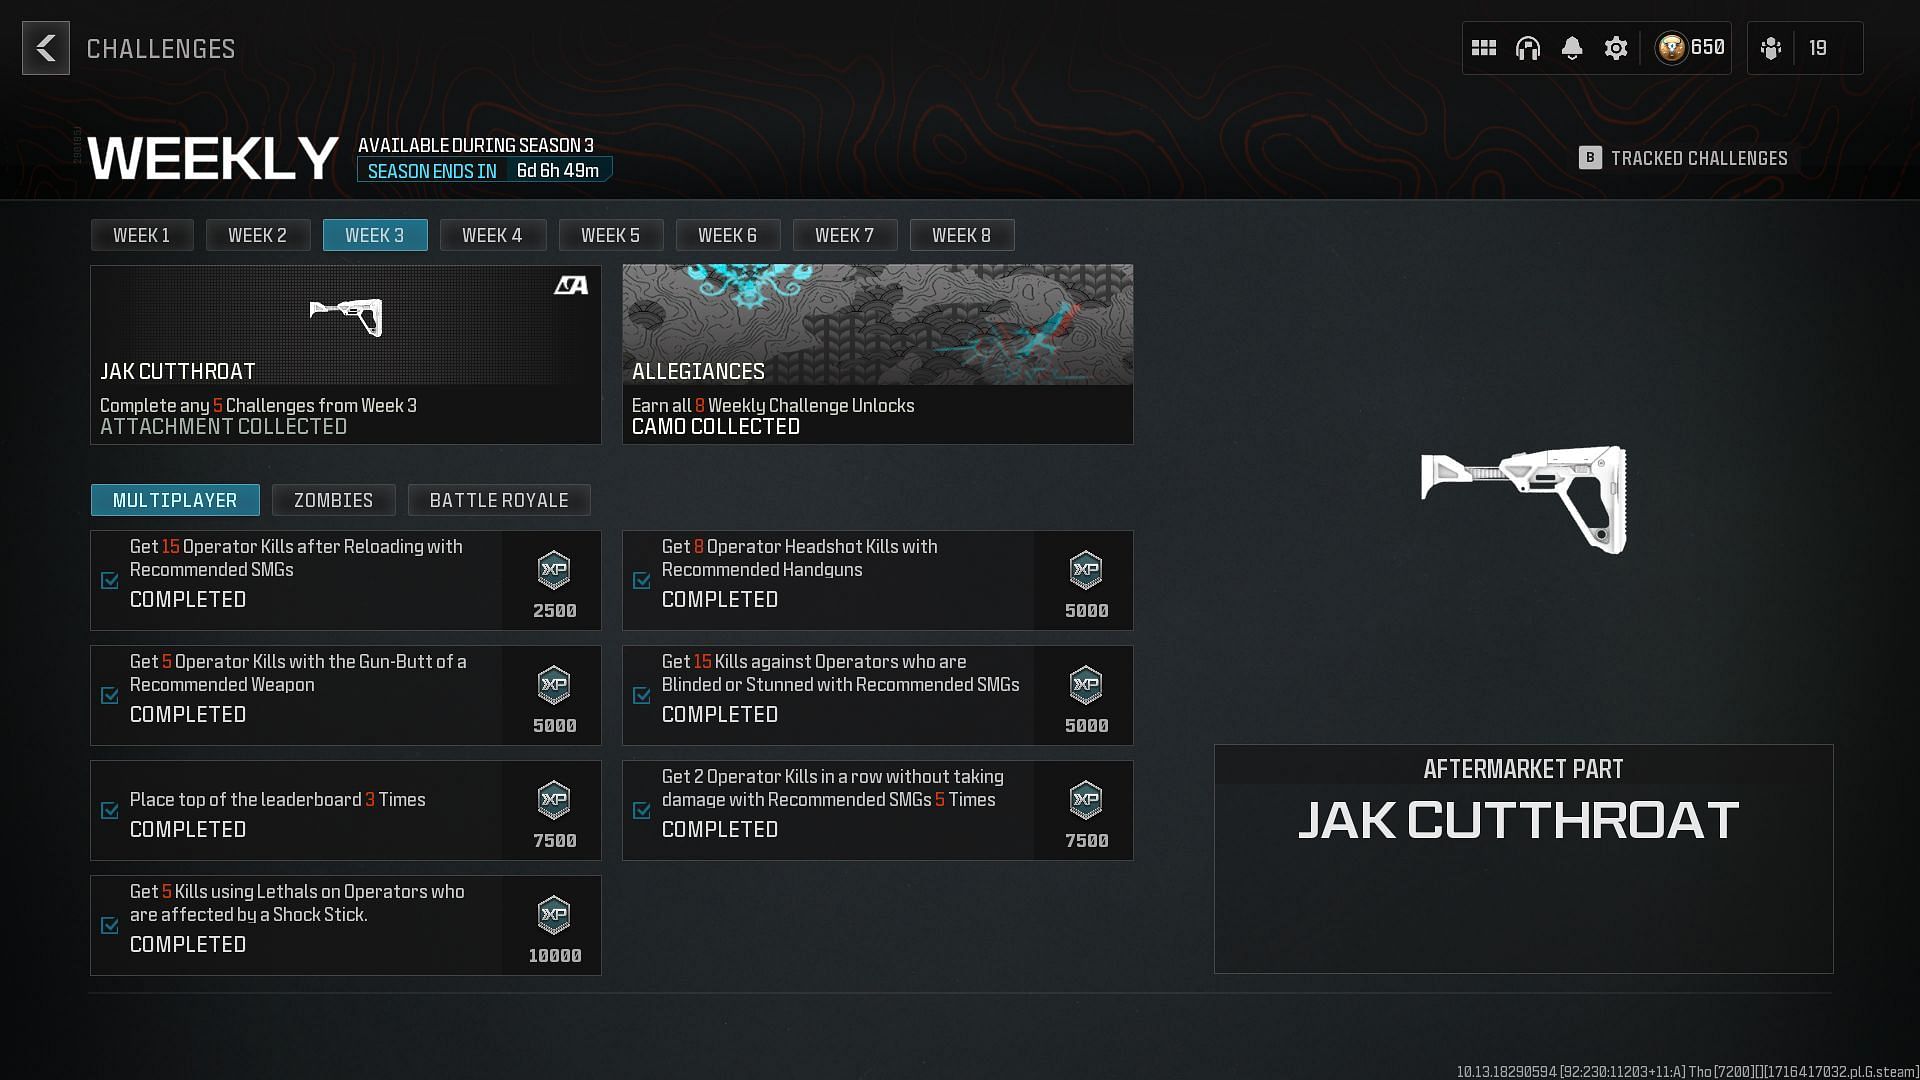 Unlocking the JAK Cutthroat in MW3 (Image via Activision)